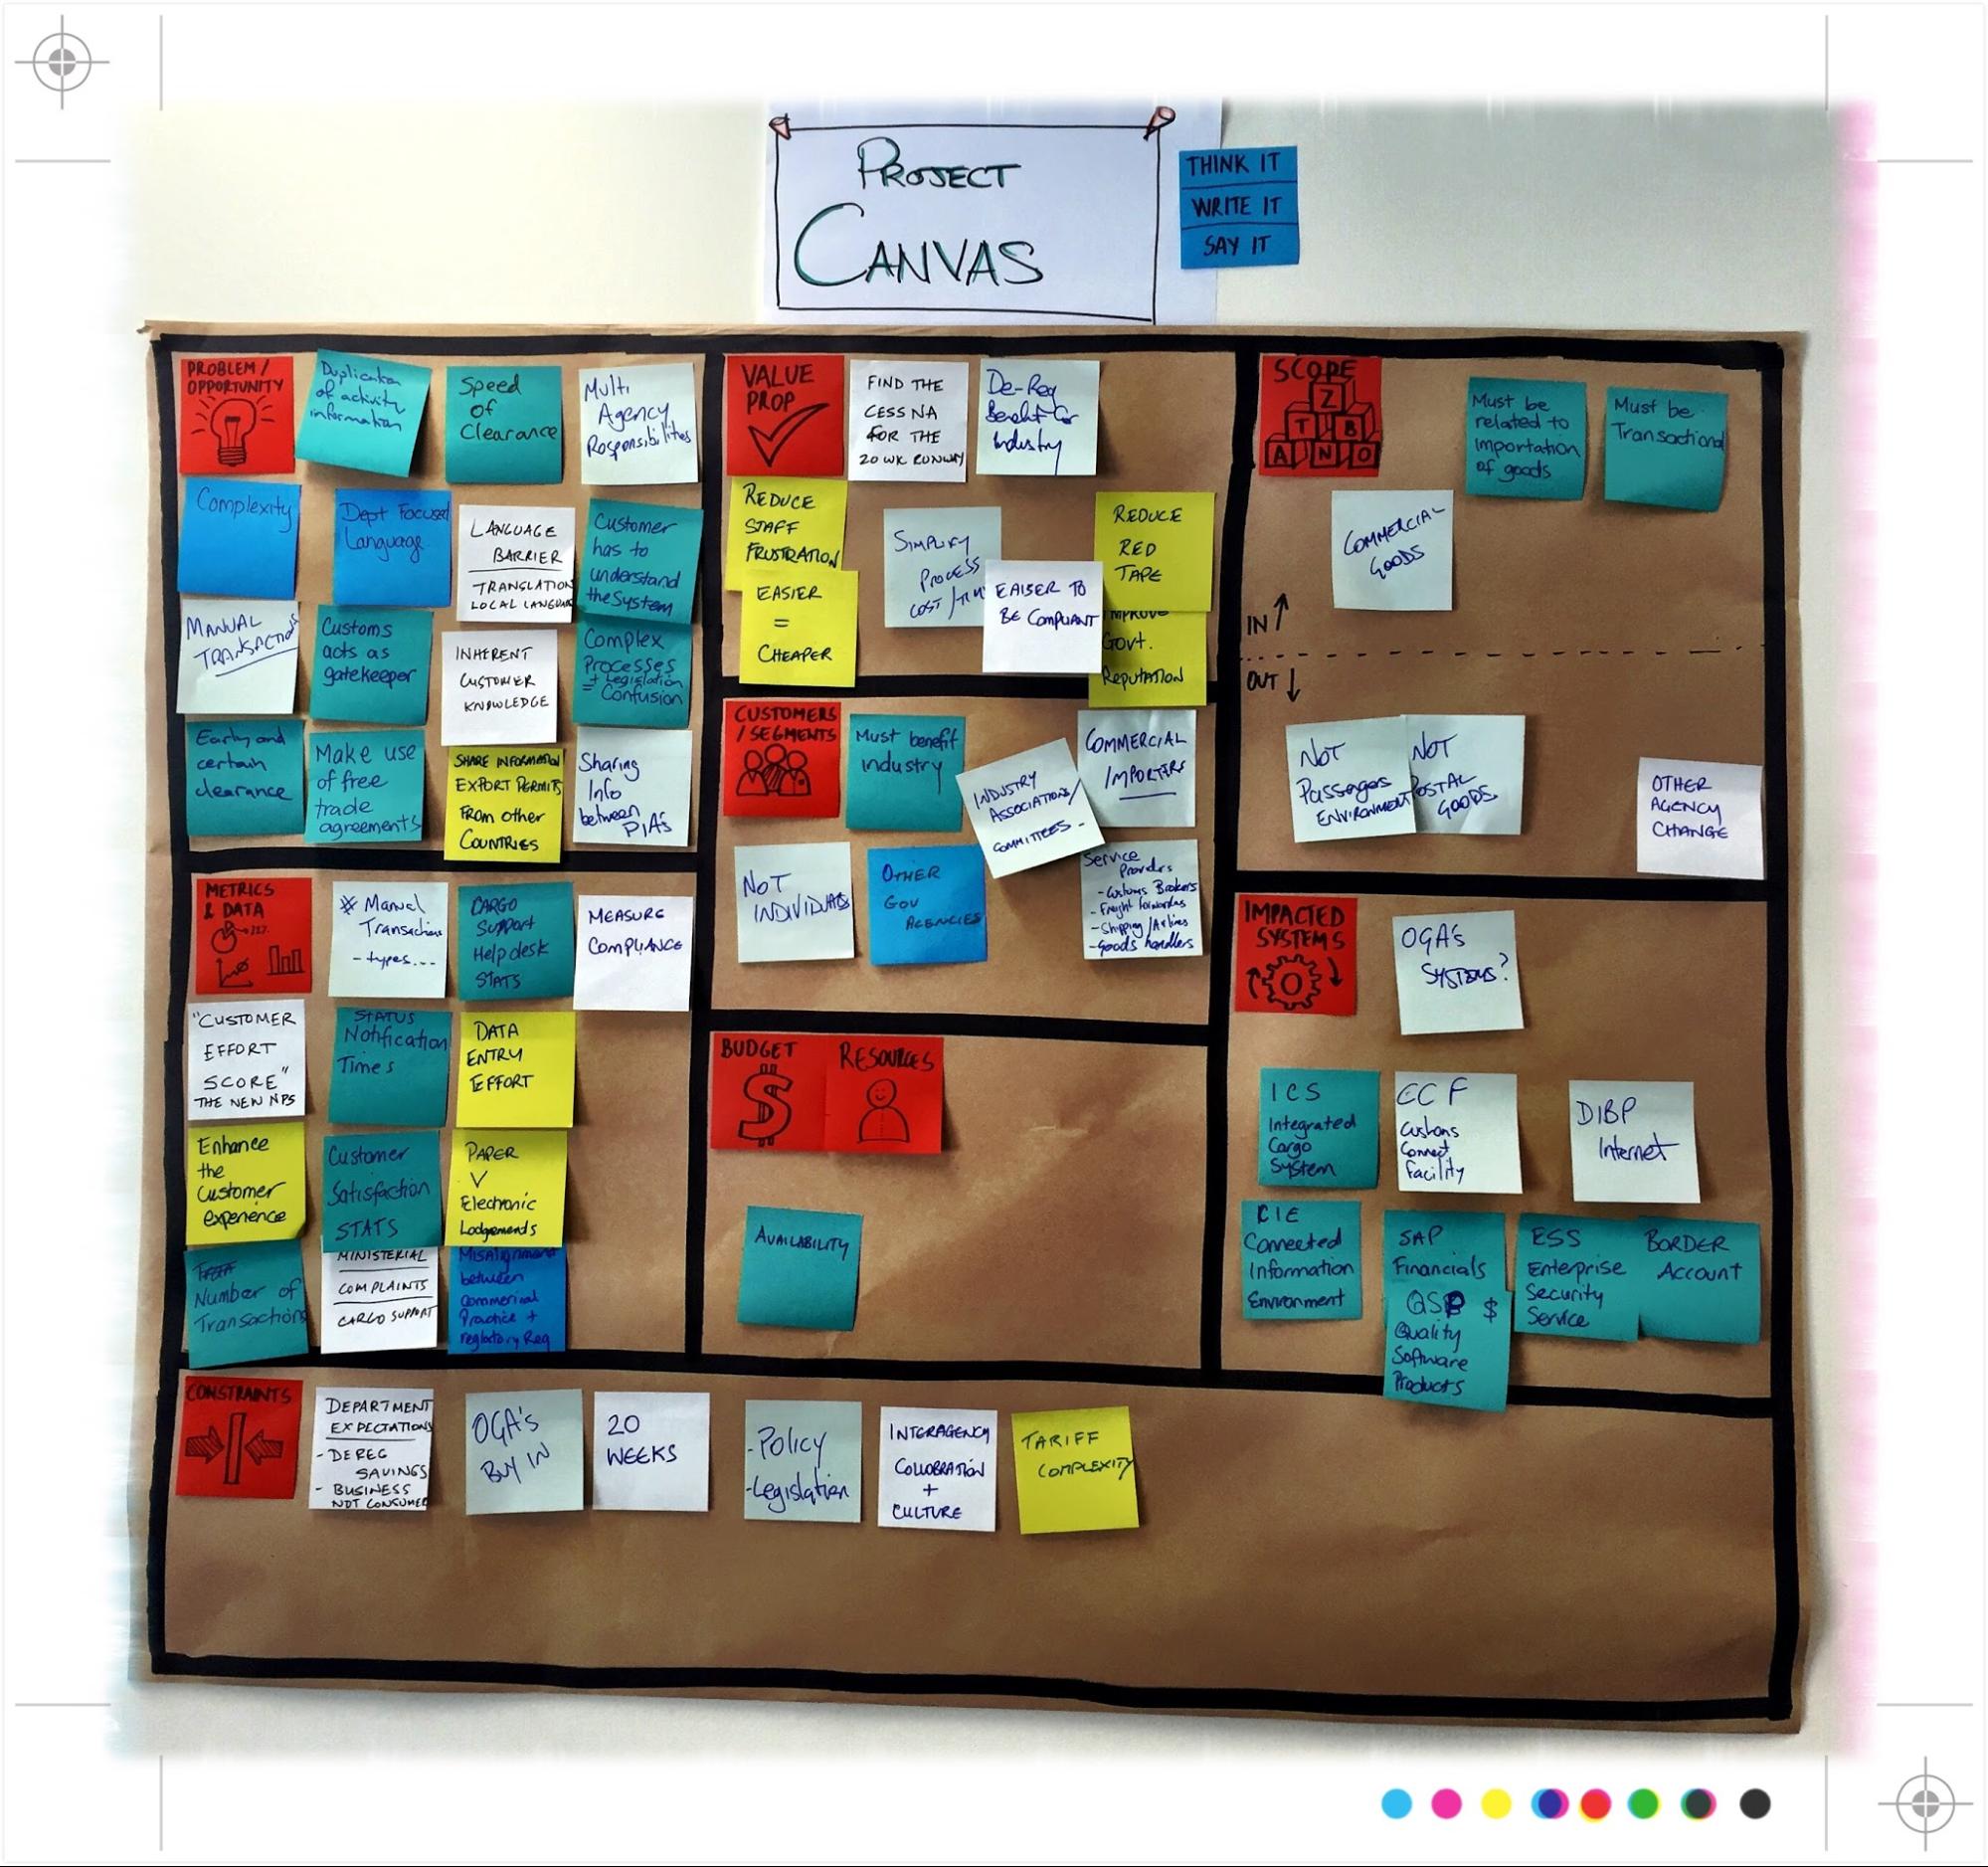 discovery canvas full of sticky notes